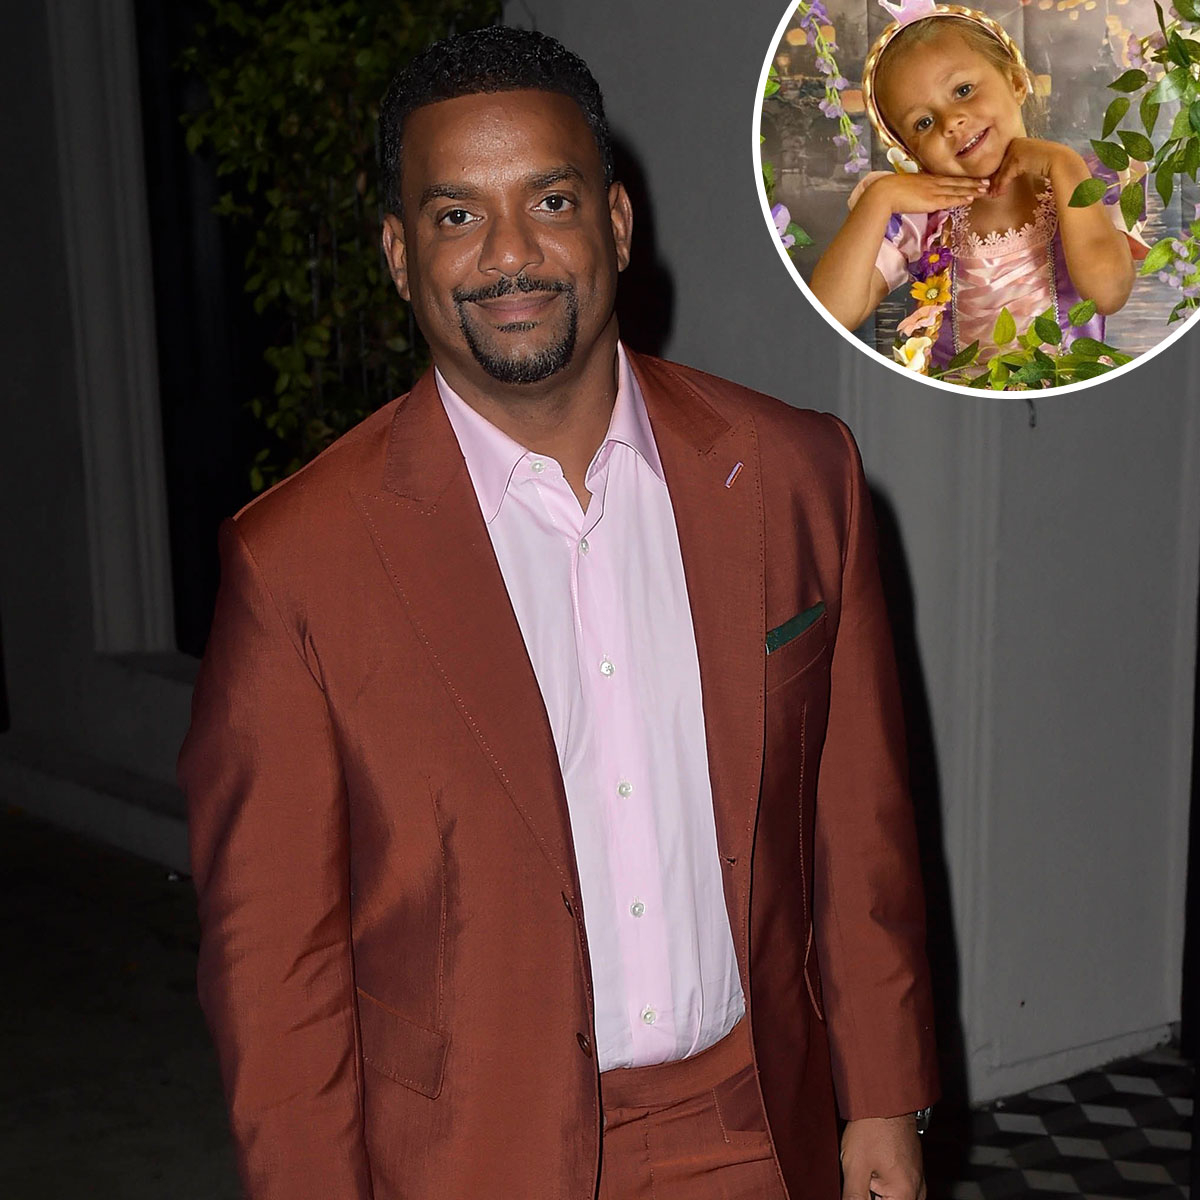 Alfonso Ribeiro’s Daughter, 4, Has Emergency Surgery After Accident